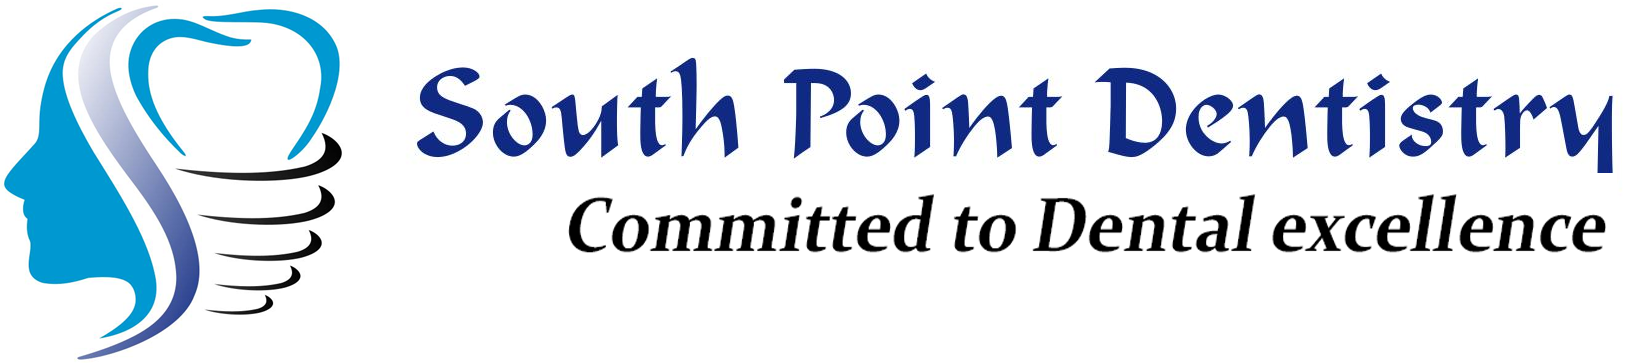 South Point Dentistry|Hospitals|Medical Services